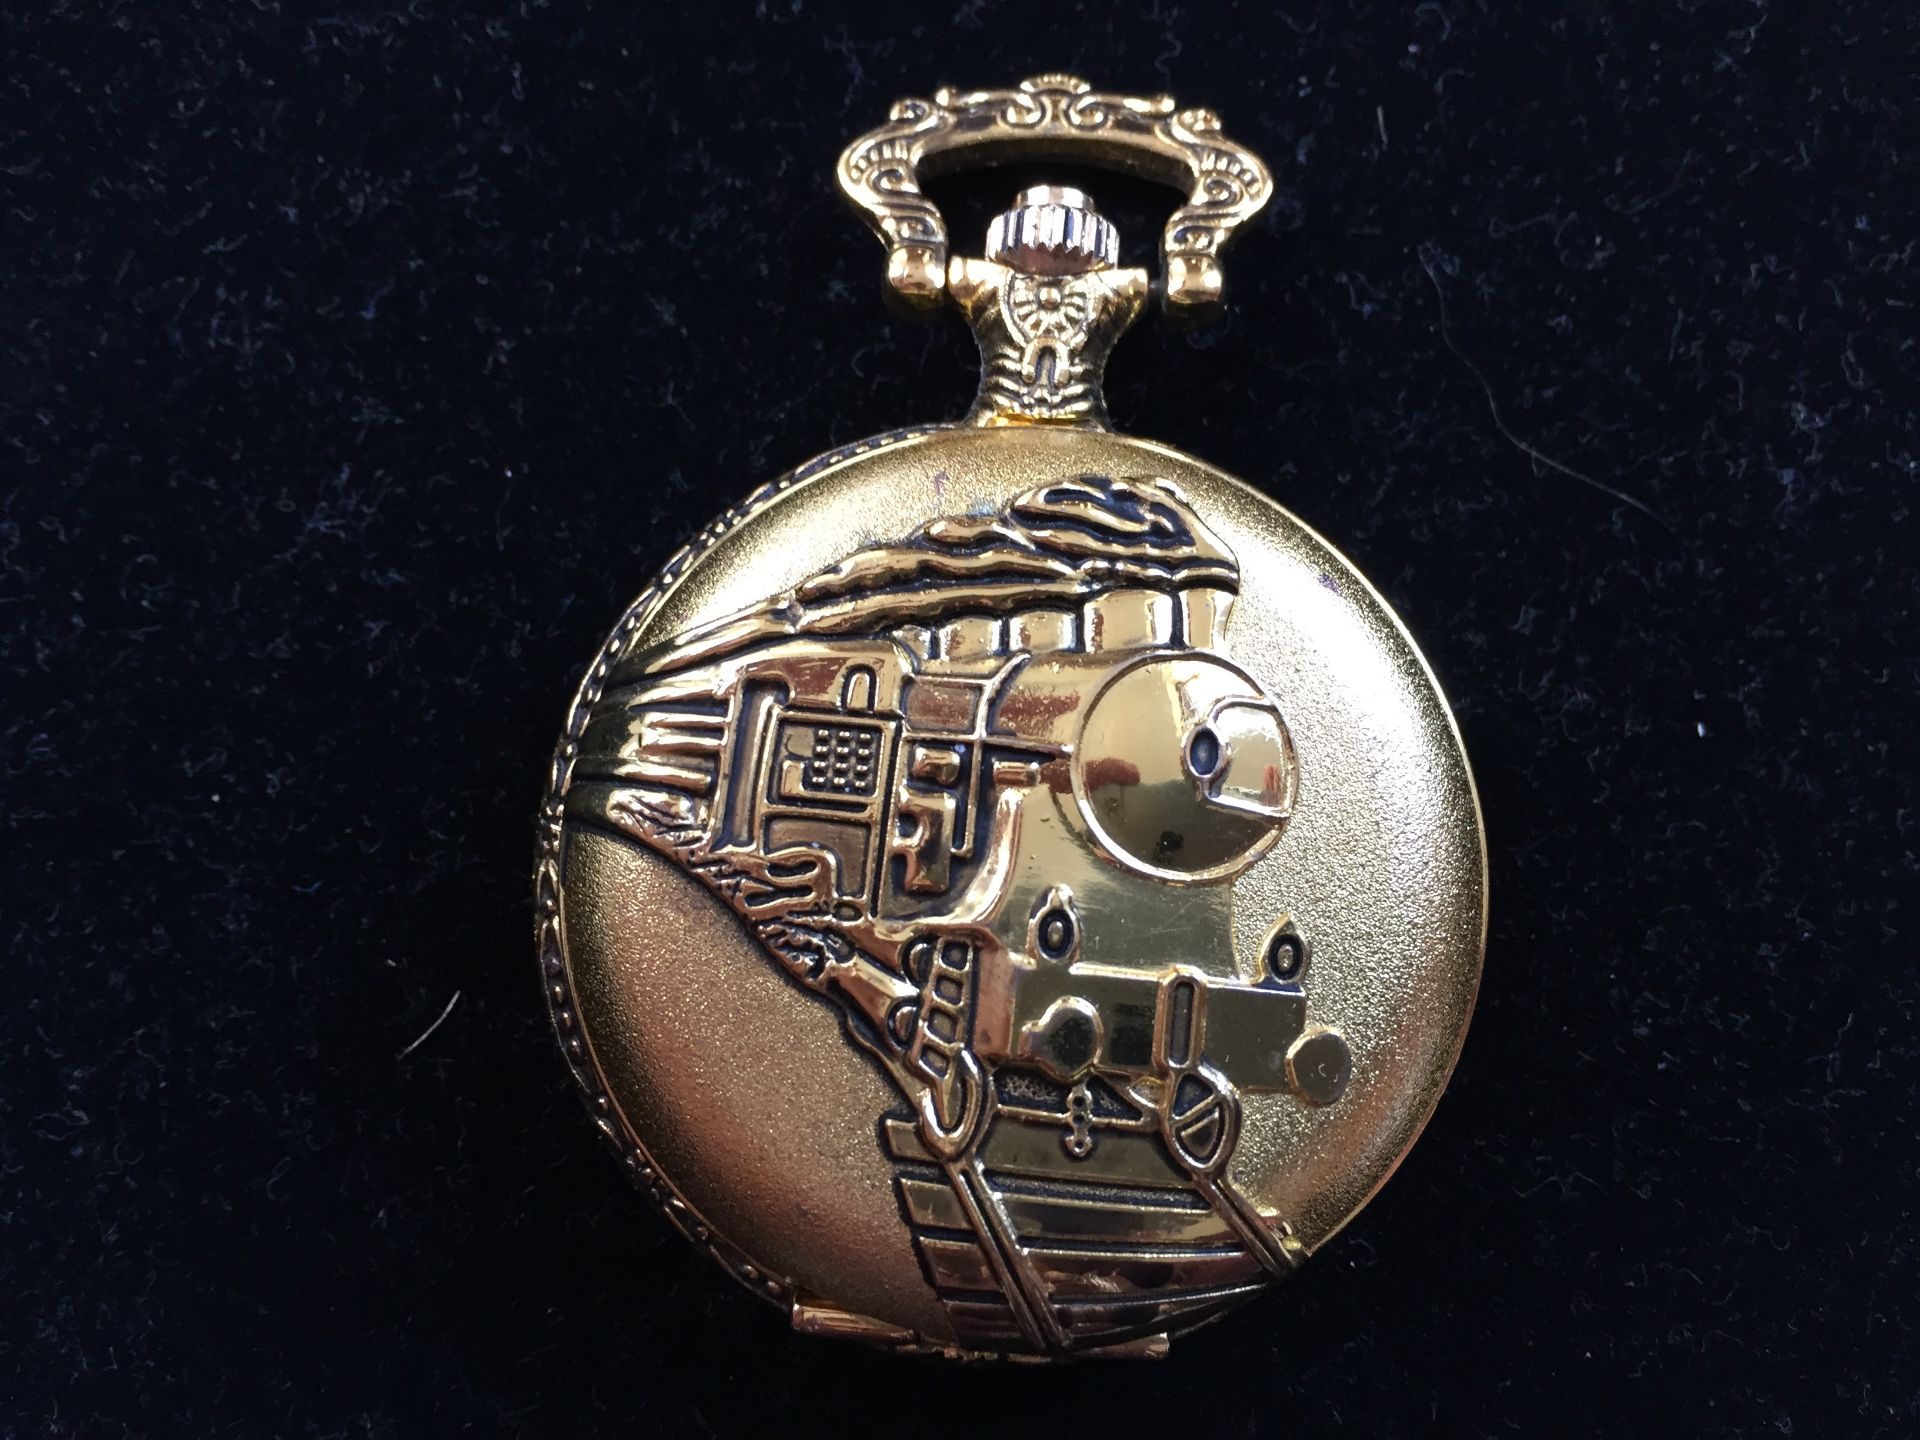 Ingersoll pocket watch. Hand-winding pocket watch with chain. Train pocket watch. - Image 5 of 7